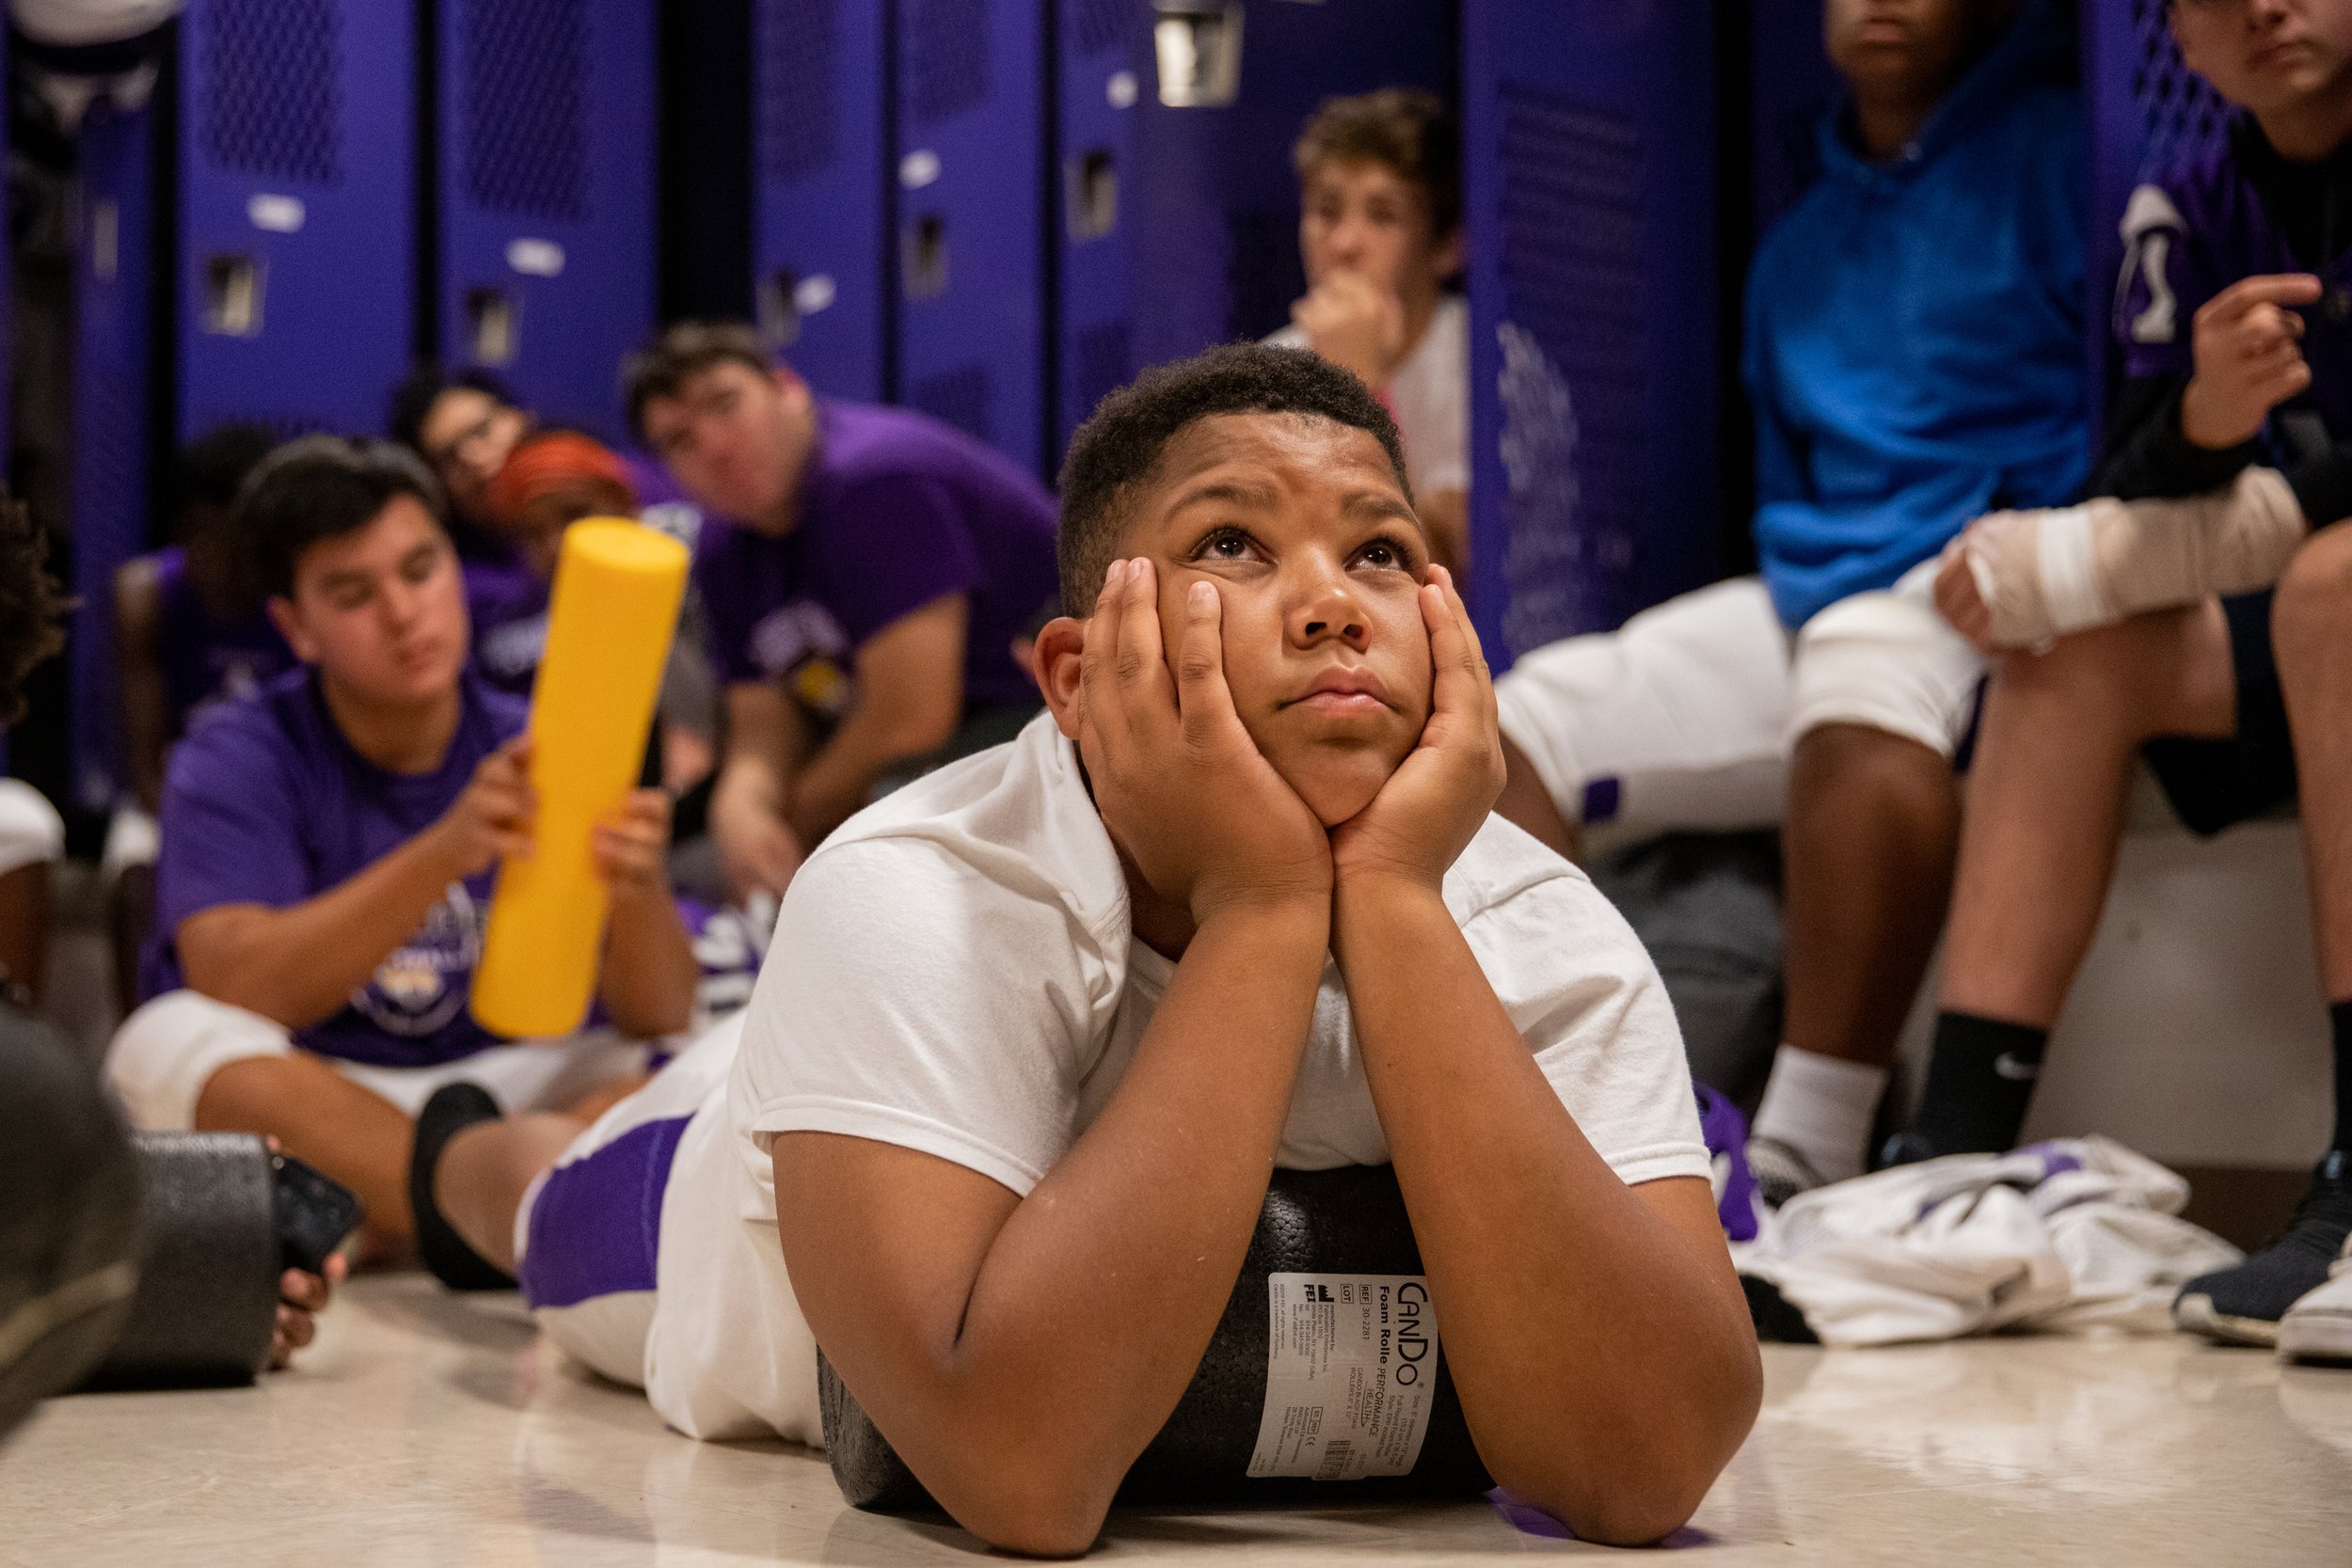  The 33 players and seven coaches that comprise the team all squeeze into one men's locker room in order to discuss the plays they want to perform during the games. Jevontay Paisant, a freshman on the team, listens to the coaches as they prepare for 